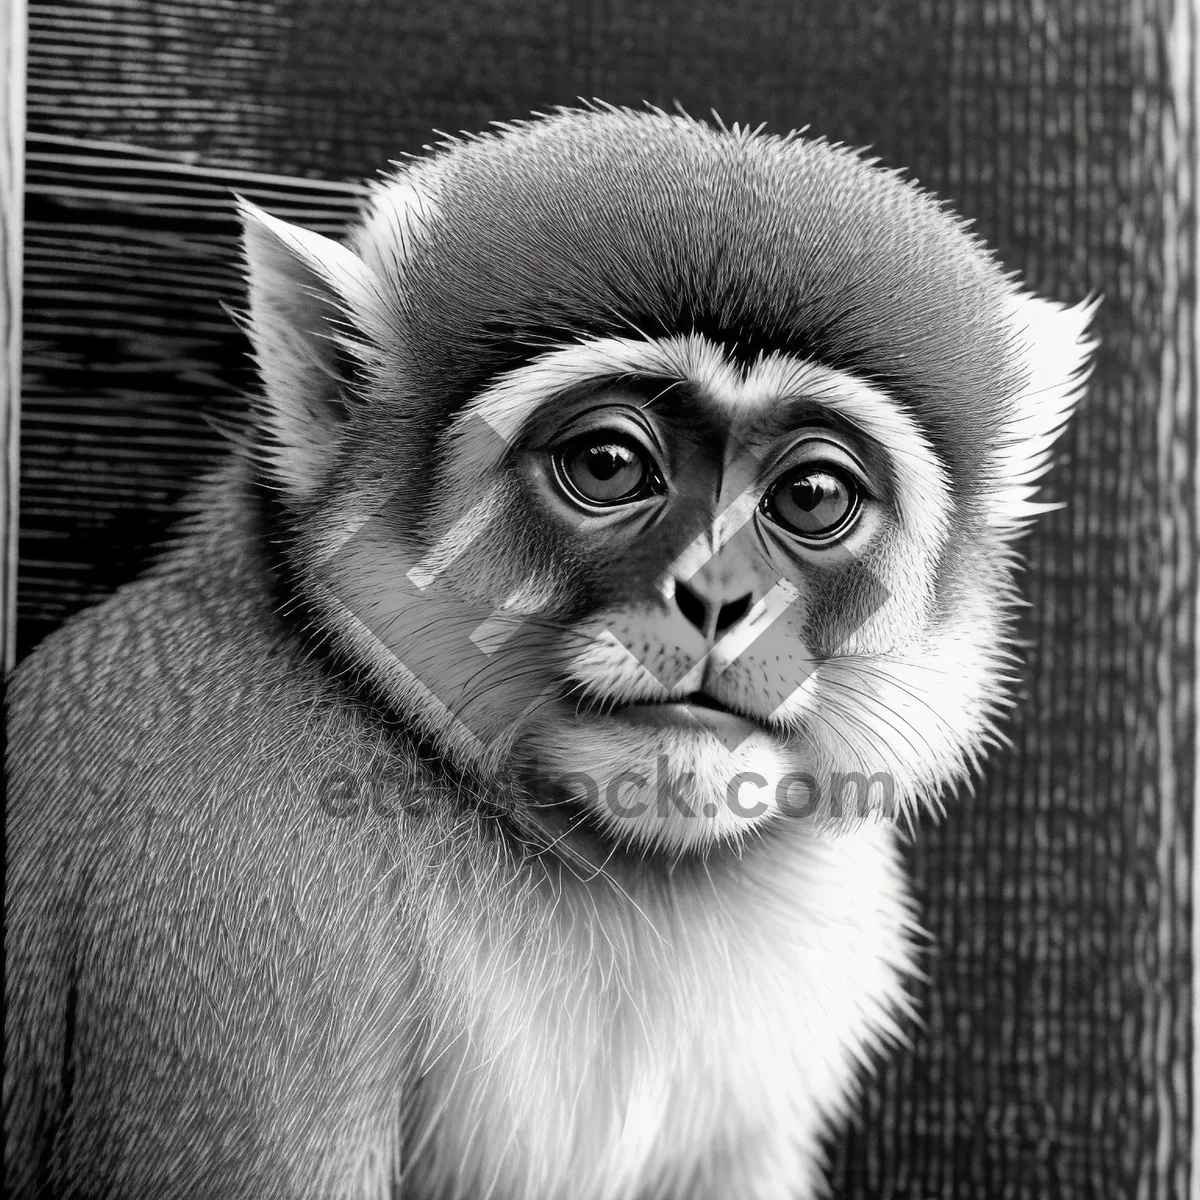 Picture of Playful Gibbon: Wild Primate Monkey in Zoo